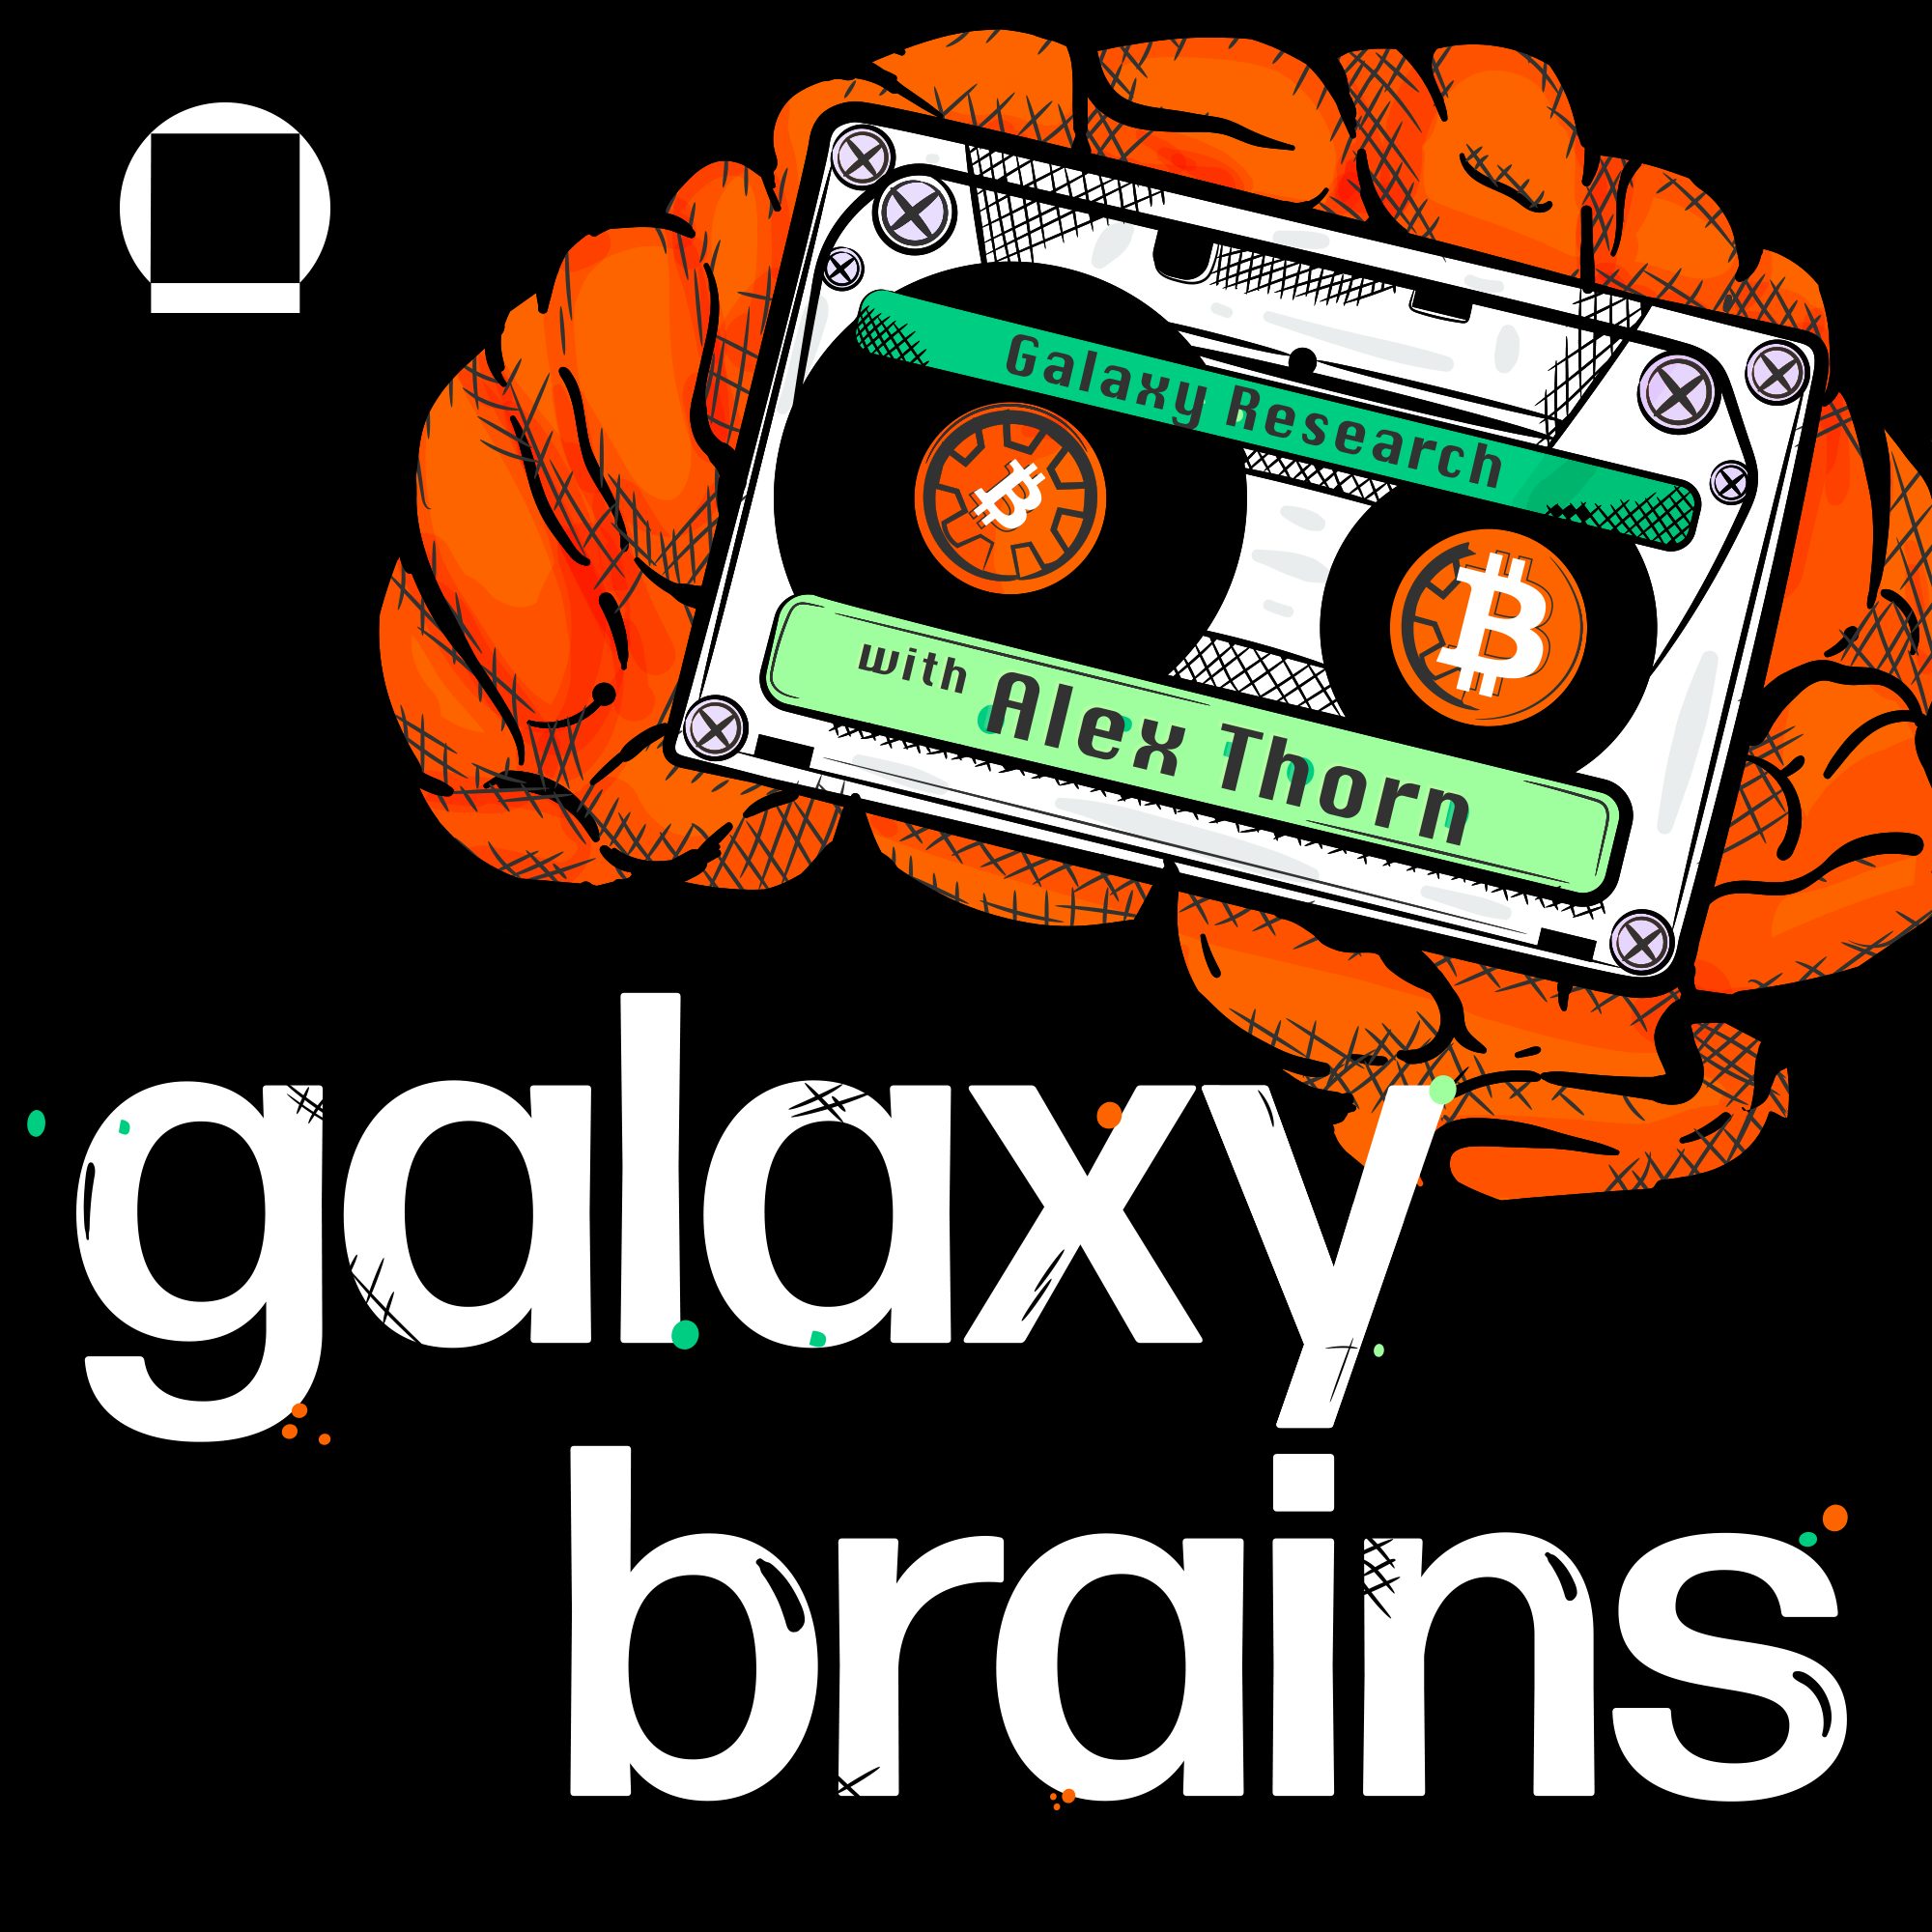 Bitcoin Mining After the Halving w/ Brian Wright (Galaxy)